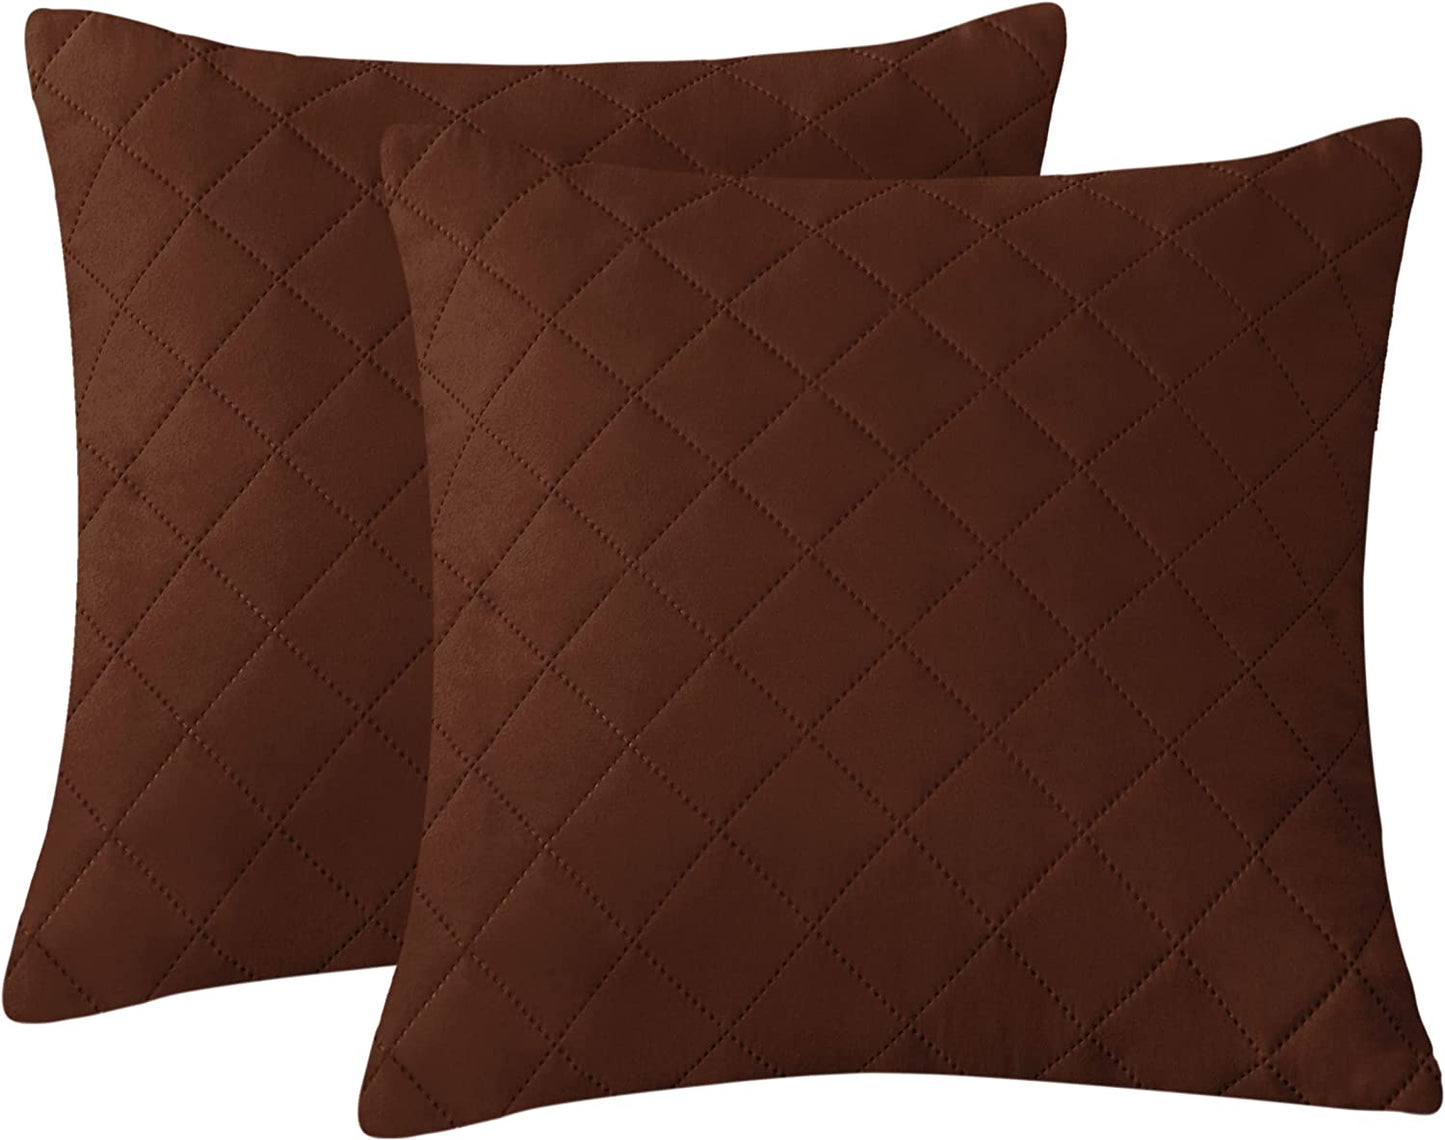 QUILTED CUSHION COVER SQUARE PATTERN 16 X 16 INCHES - COFFEE